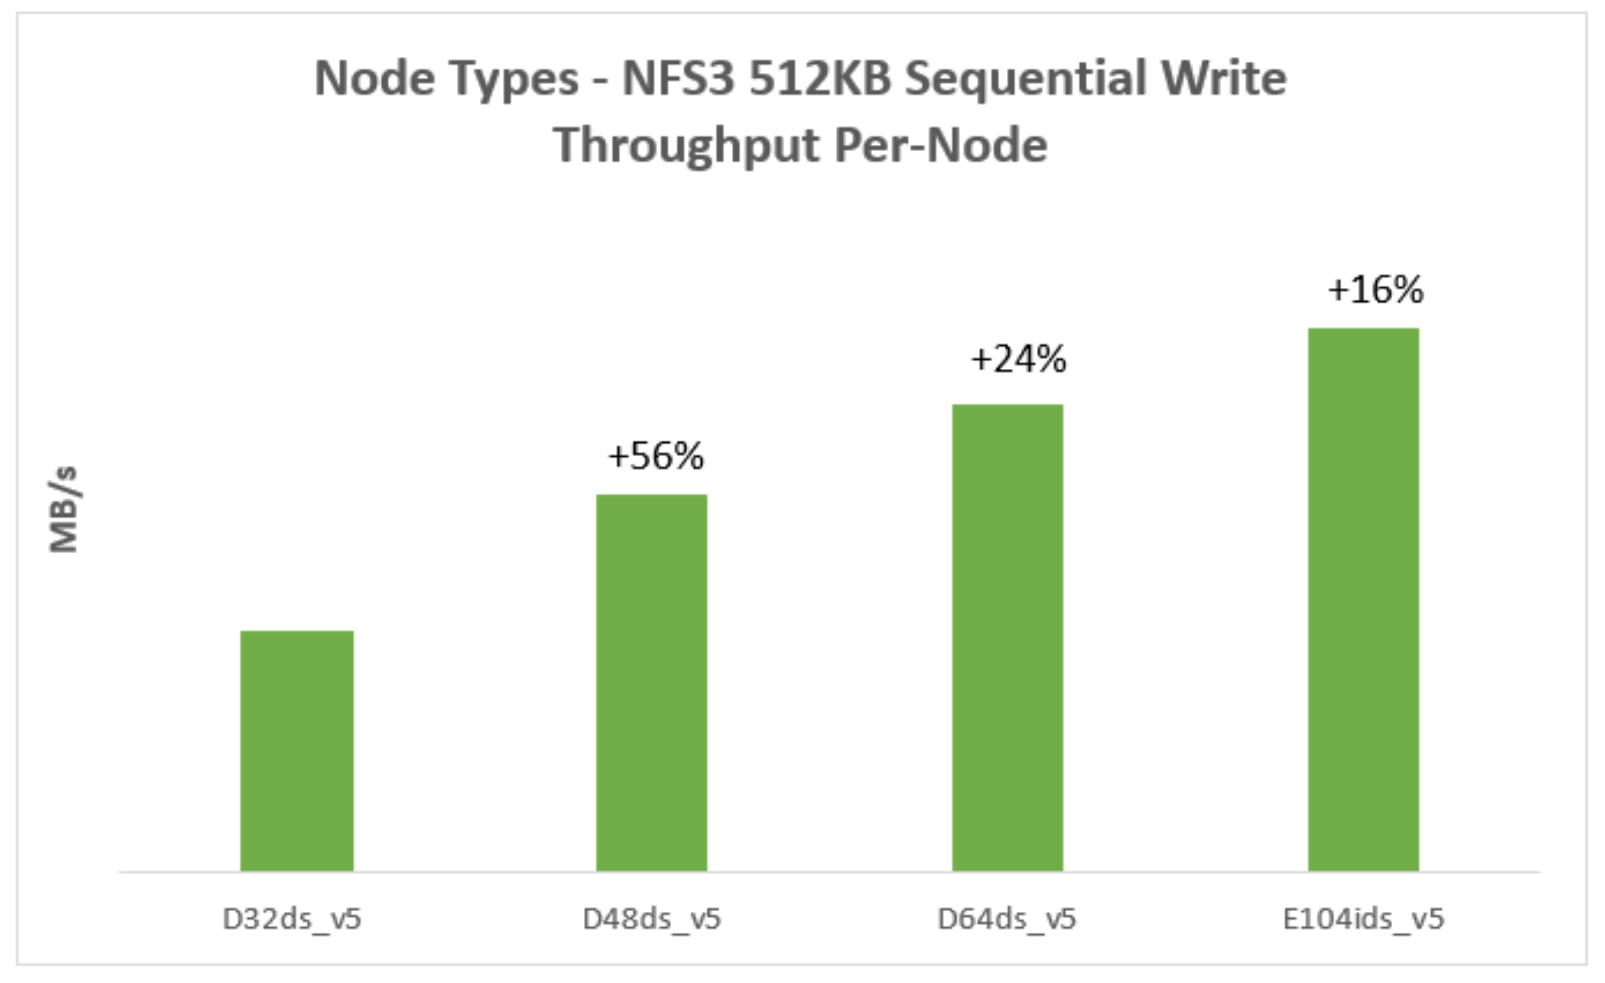 A figure of sequential write throughput for different node types, D32ds_v5, D48ds_v5, D64ds_v5, E104ids_v5.1. The D48ds_v5 write throughput increases by 56% compared to D32ds_v5.2. The D64ds_v5 write throughput increases by 24% compared to D48ds_v5.3. The E104ids_v5 write throughput increases by 16% compared to D64ds_v5.